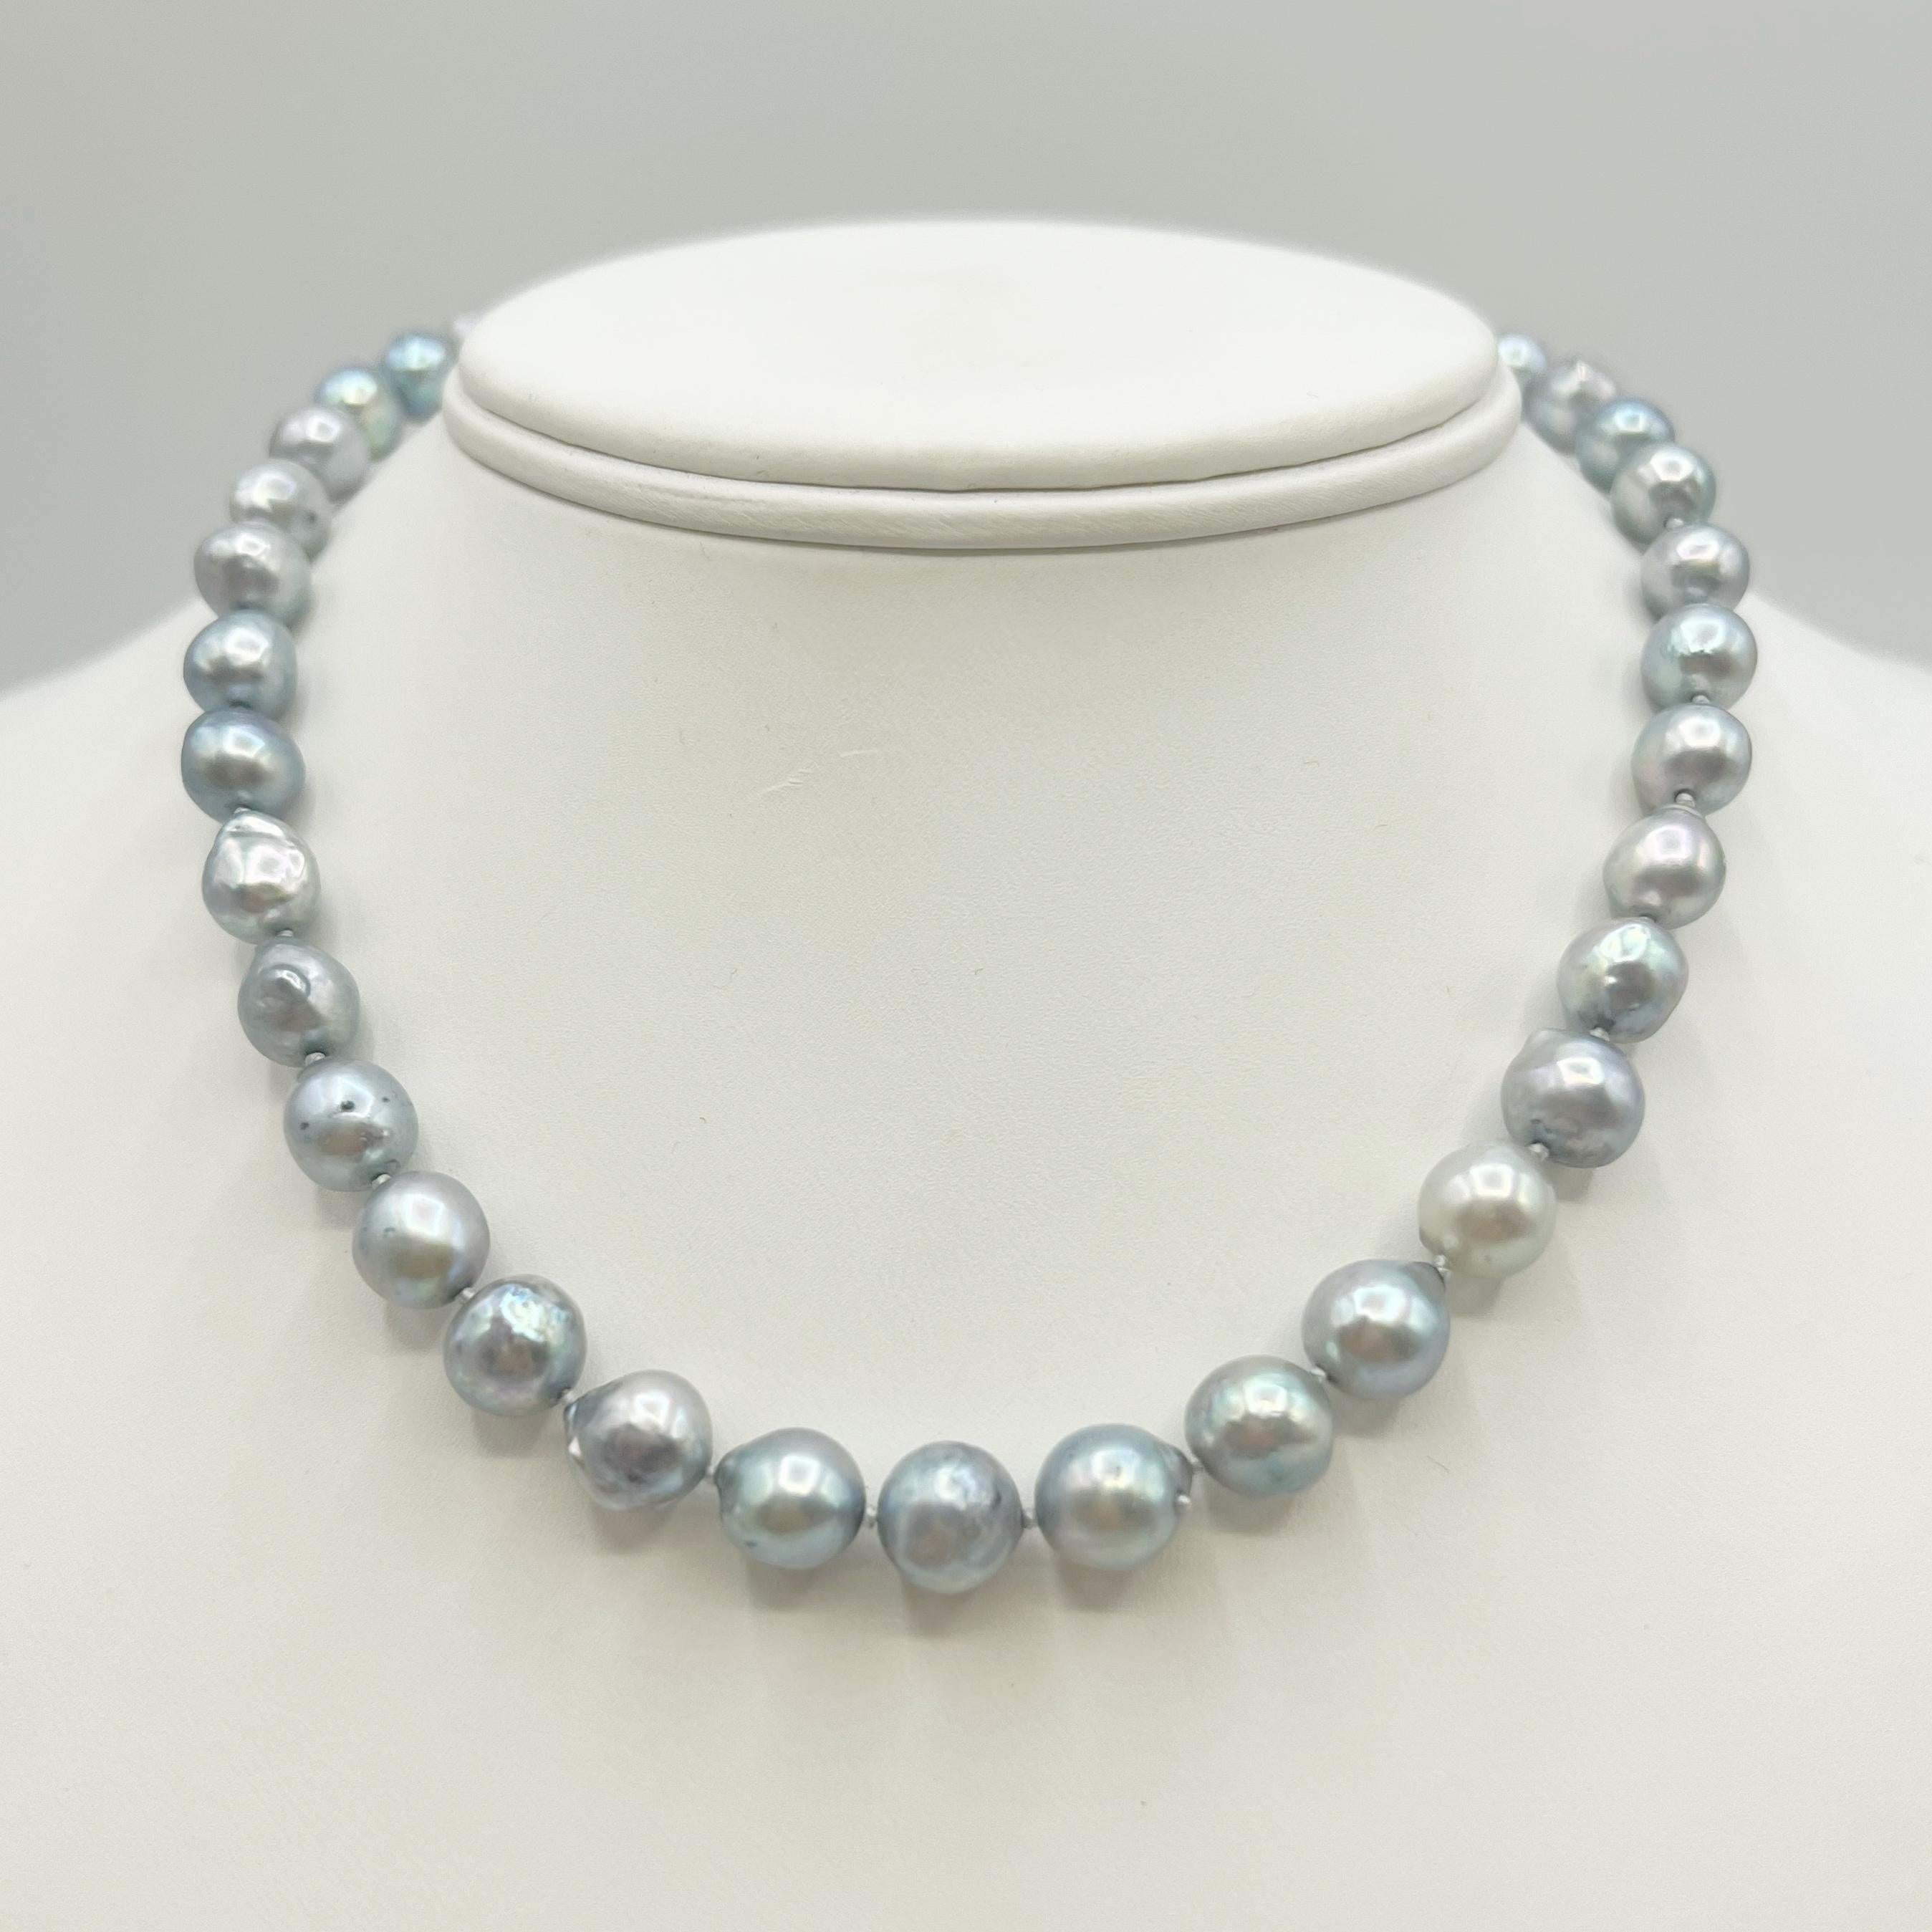 Saltwater pearls have a beautiful luster that brings out the pale blue and silver hues. The choker length of 16